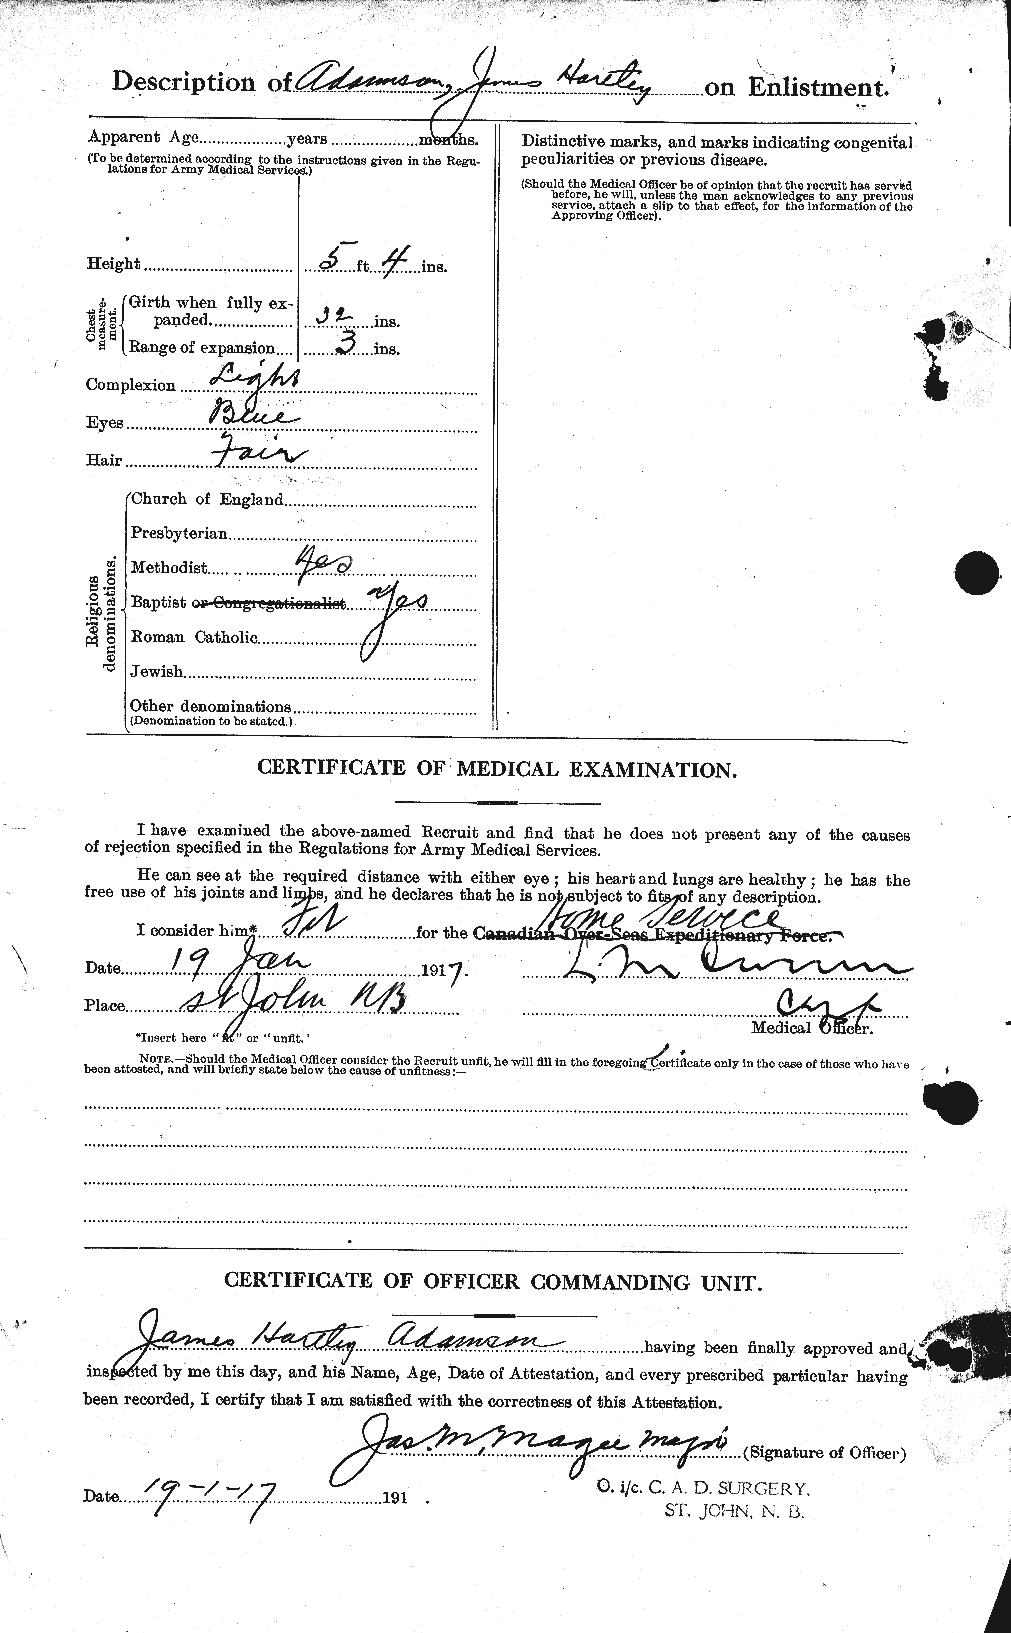 Personnel Records of the First World War - CEF 202366b